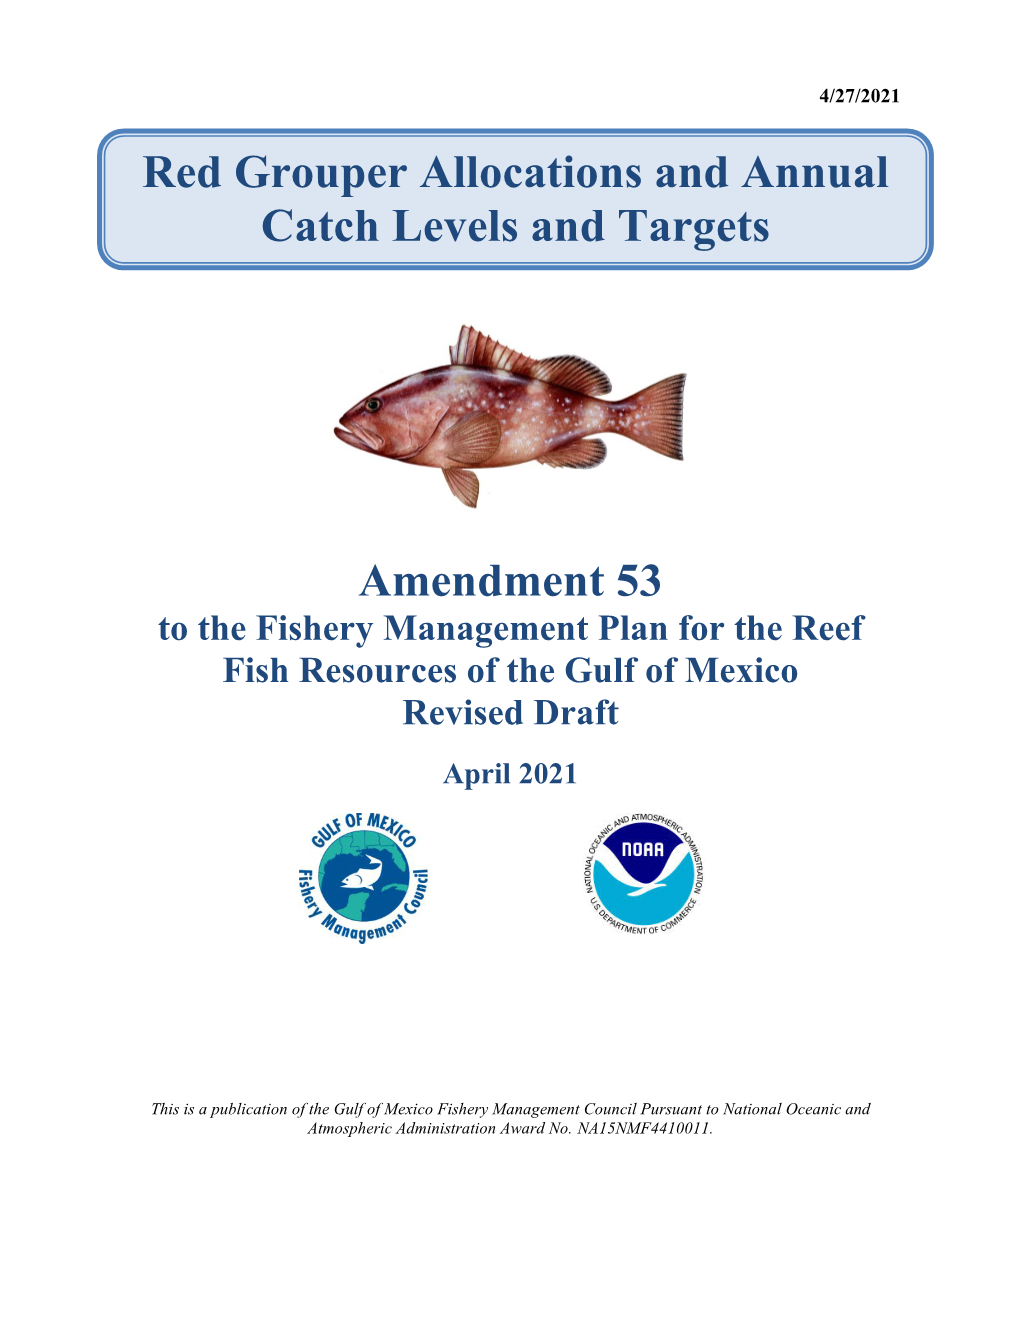 Draft Amendment 53 to the Fishery Management Plan for the Reef Fish Fishery in the Gulf of Mexico Draft Environmental Impact Statement (Deis)